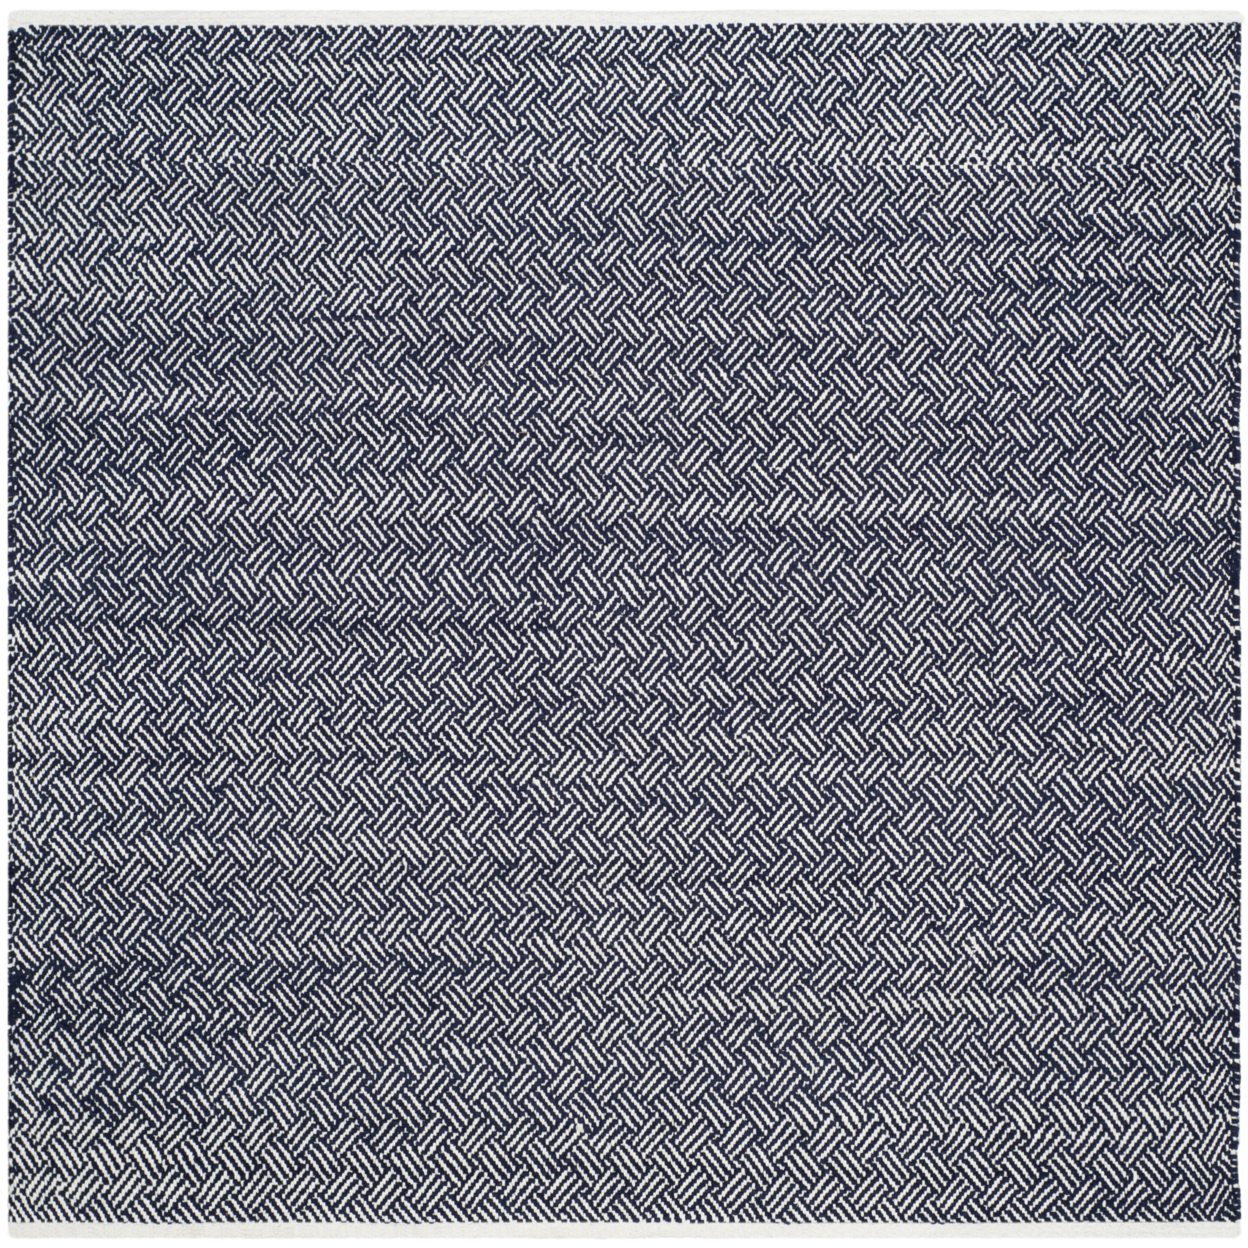 SAFAVIEH Boston Collection BOS680D Handwoven Navy Rug - 8' Square